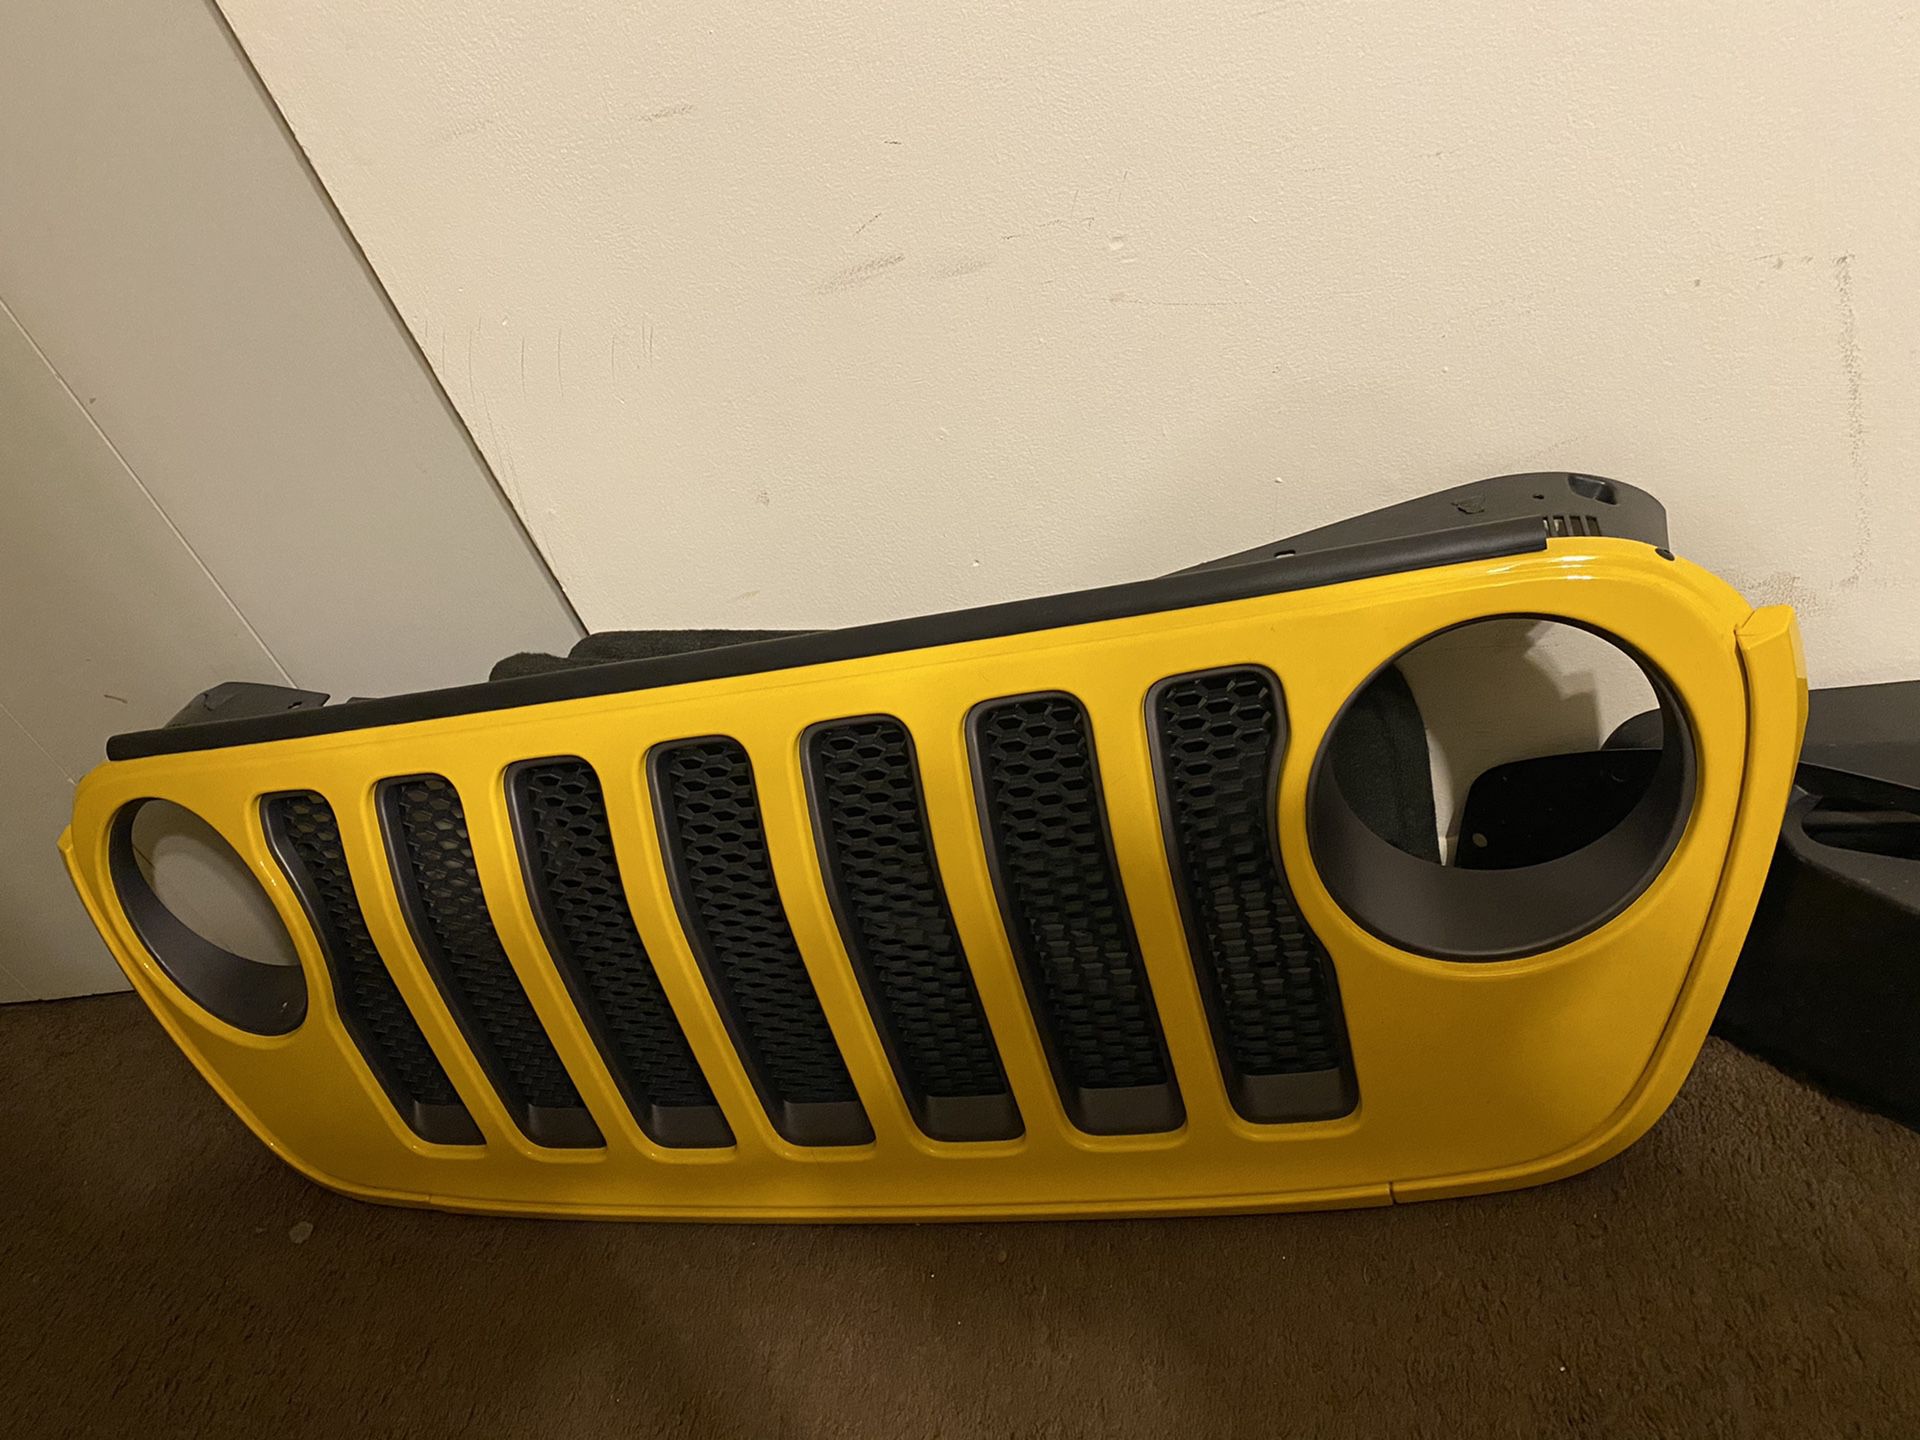 Jeep Rubicon Unlimited 2021 Brand New Front Grill - Yellow